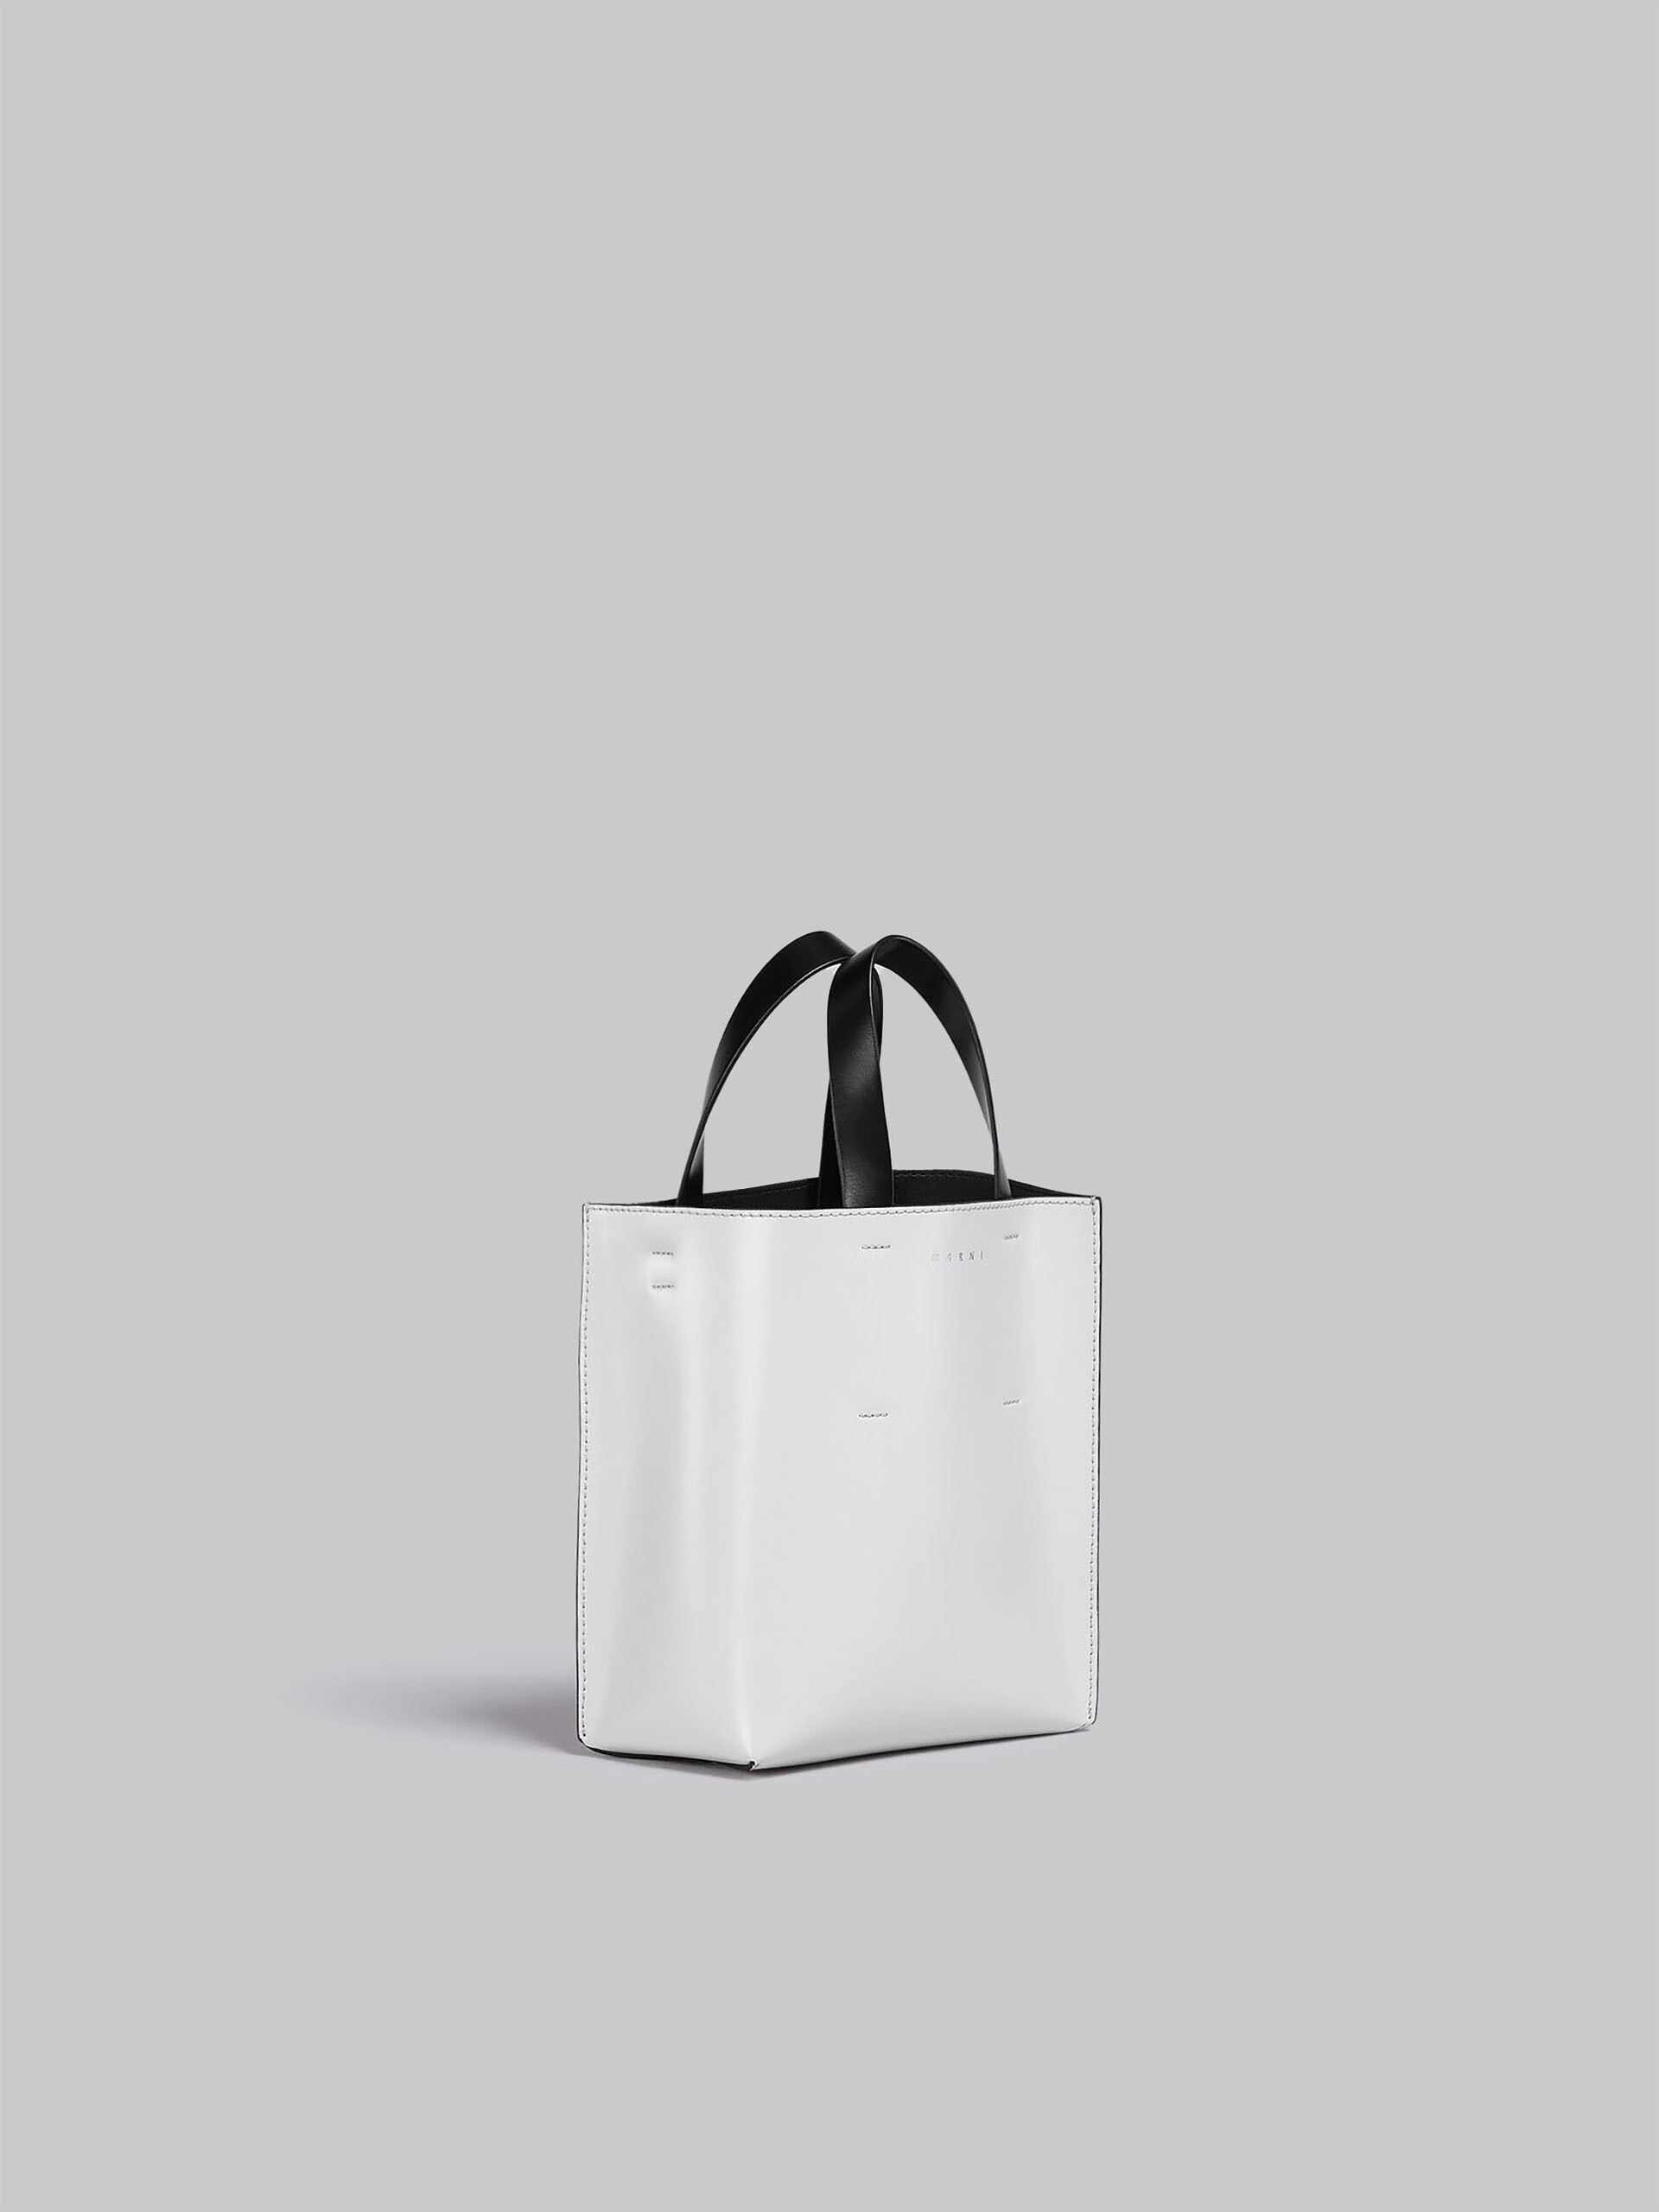 MUSEO mini bag in white and black leather - Shopping Bags - Image 6